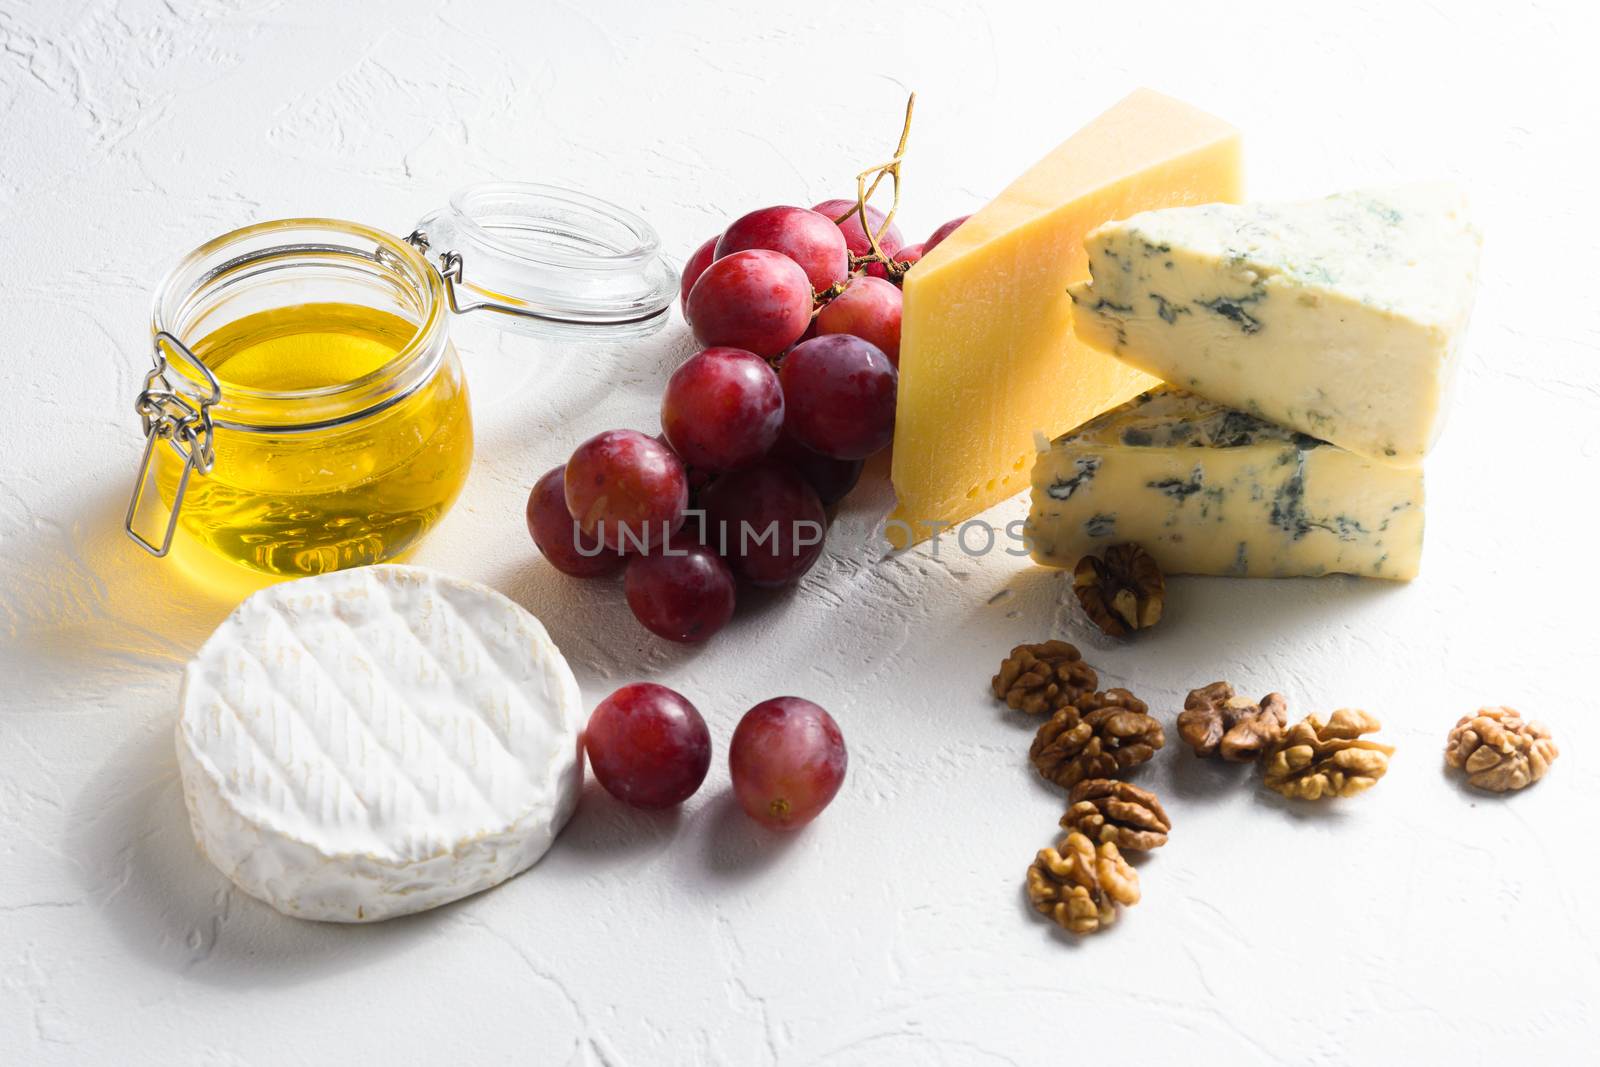 ssorted cheeses, grapes, nuts over white background, Italian and franch cheese and fruit platter with honey and wine. side view.